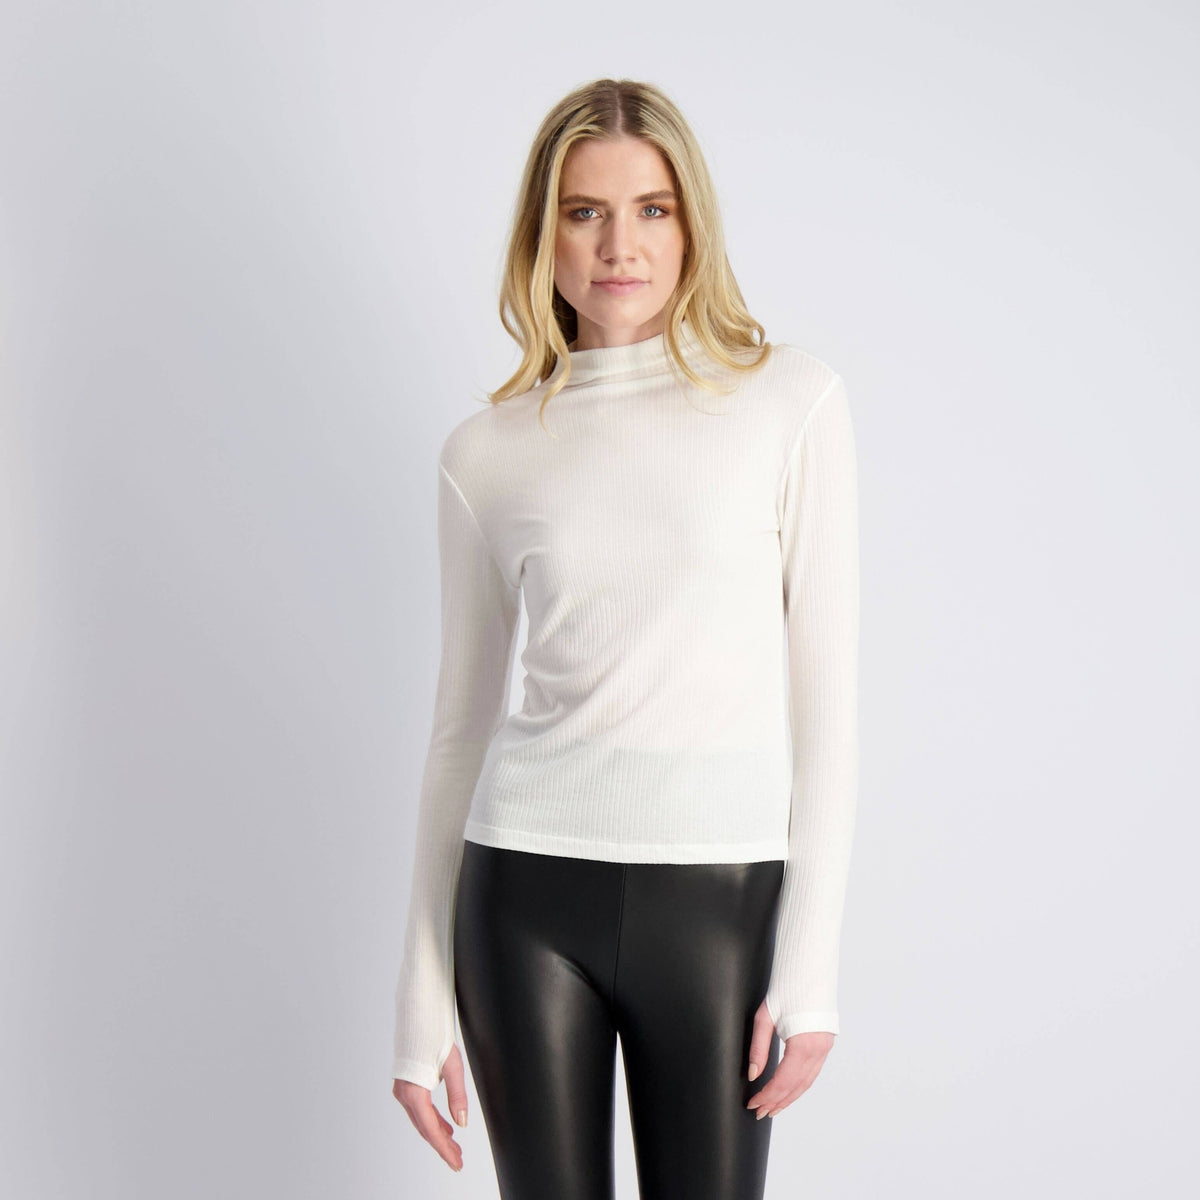 The Ludlow Long Sleeve - Eco CHIC Mock Neck Top: Midnight Black / XS